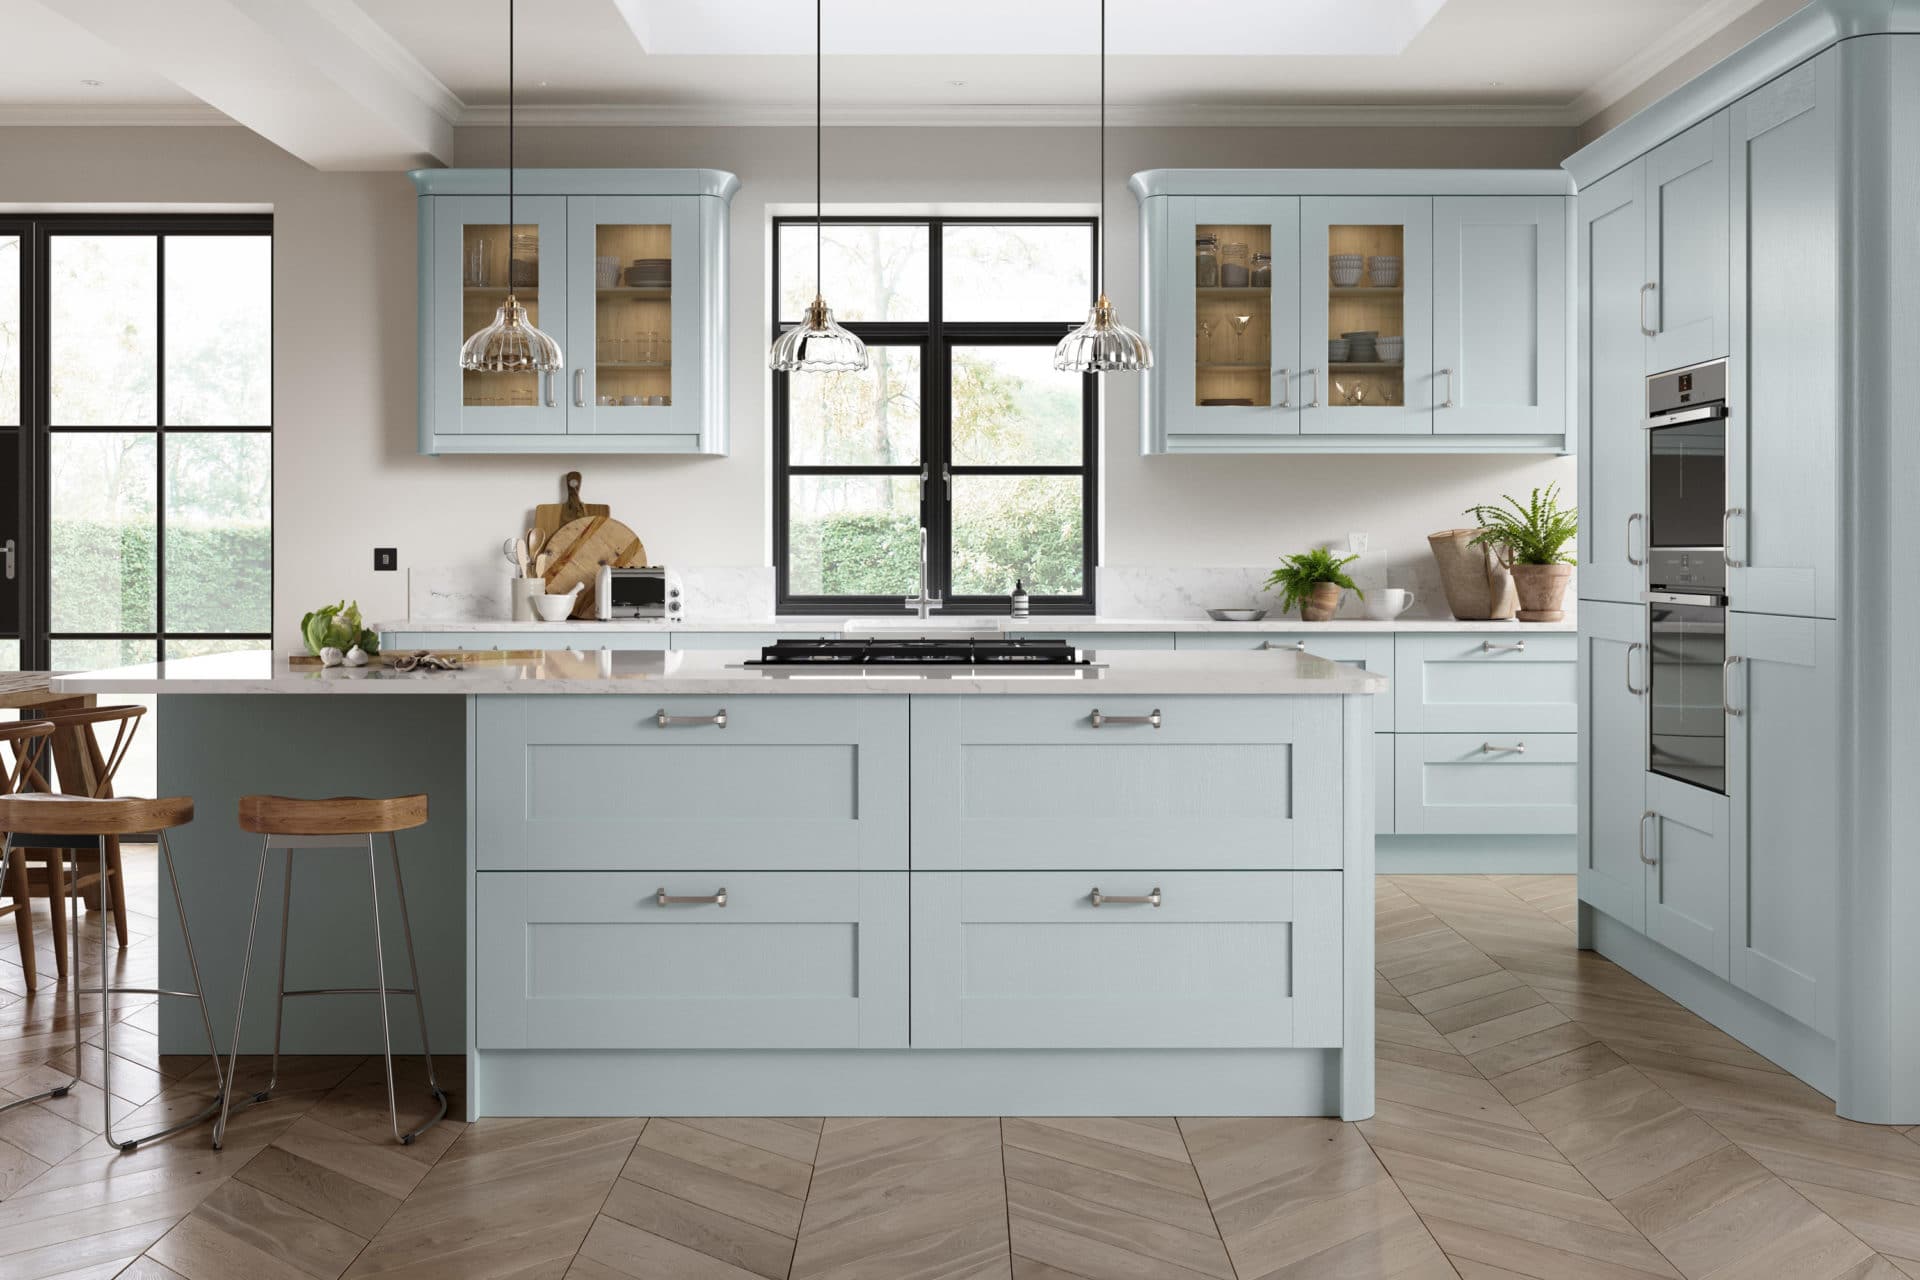 duck egg blue wall with cream kitchen